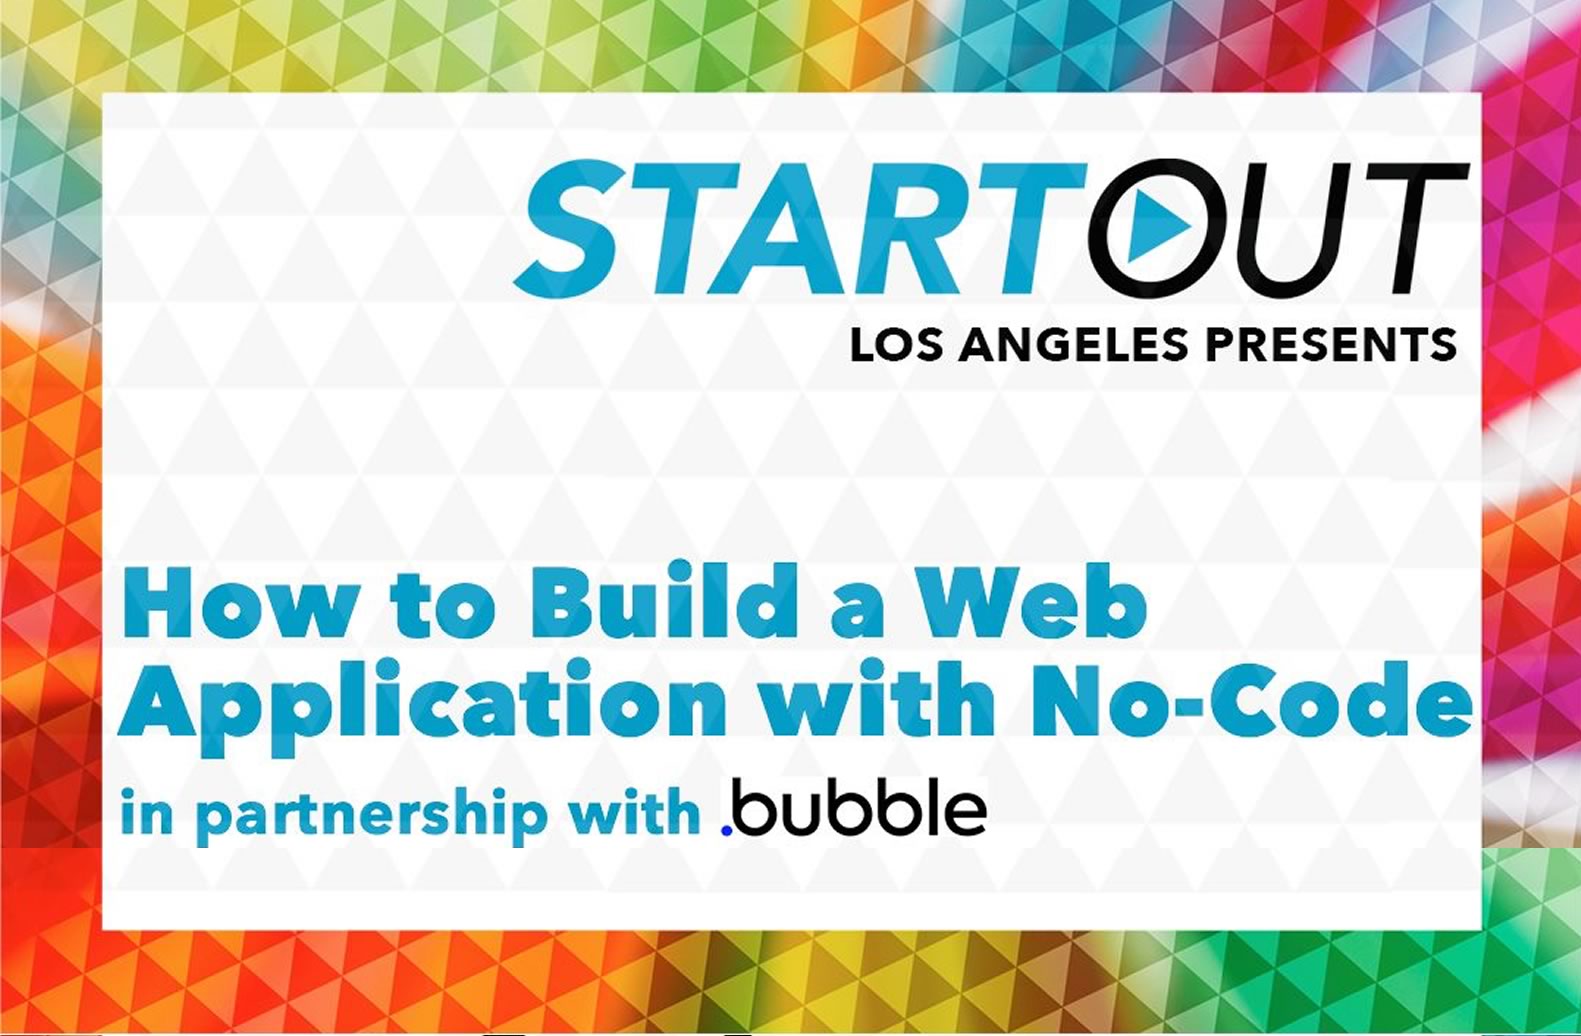 You are currently viewing Webinar: How to Build a Web Application with No-Code